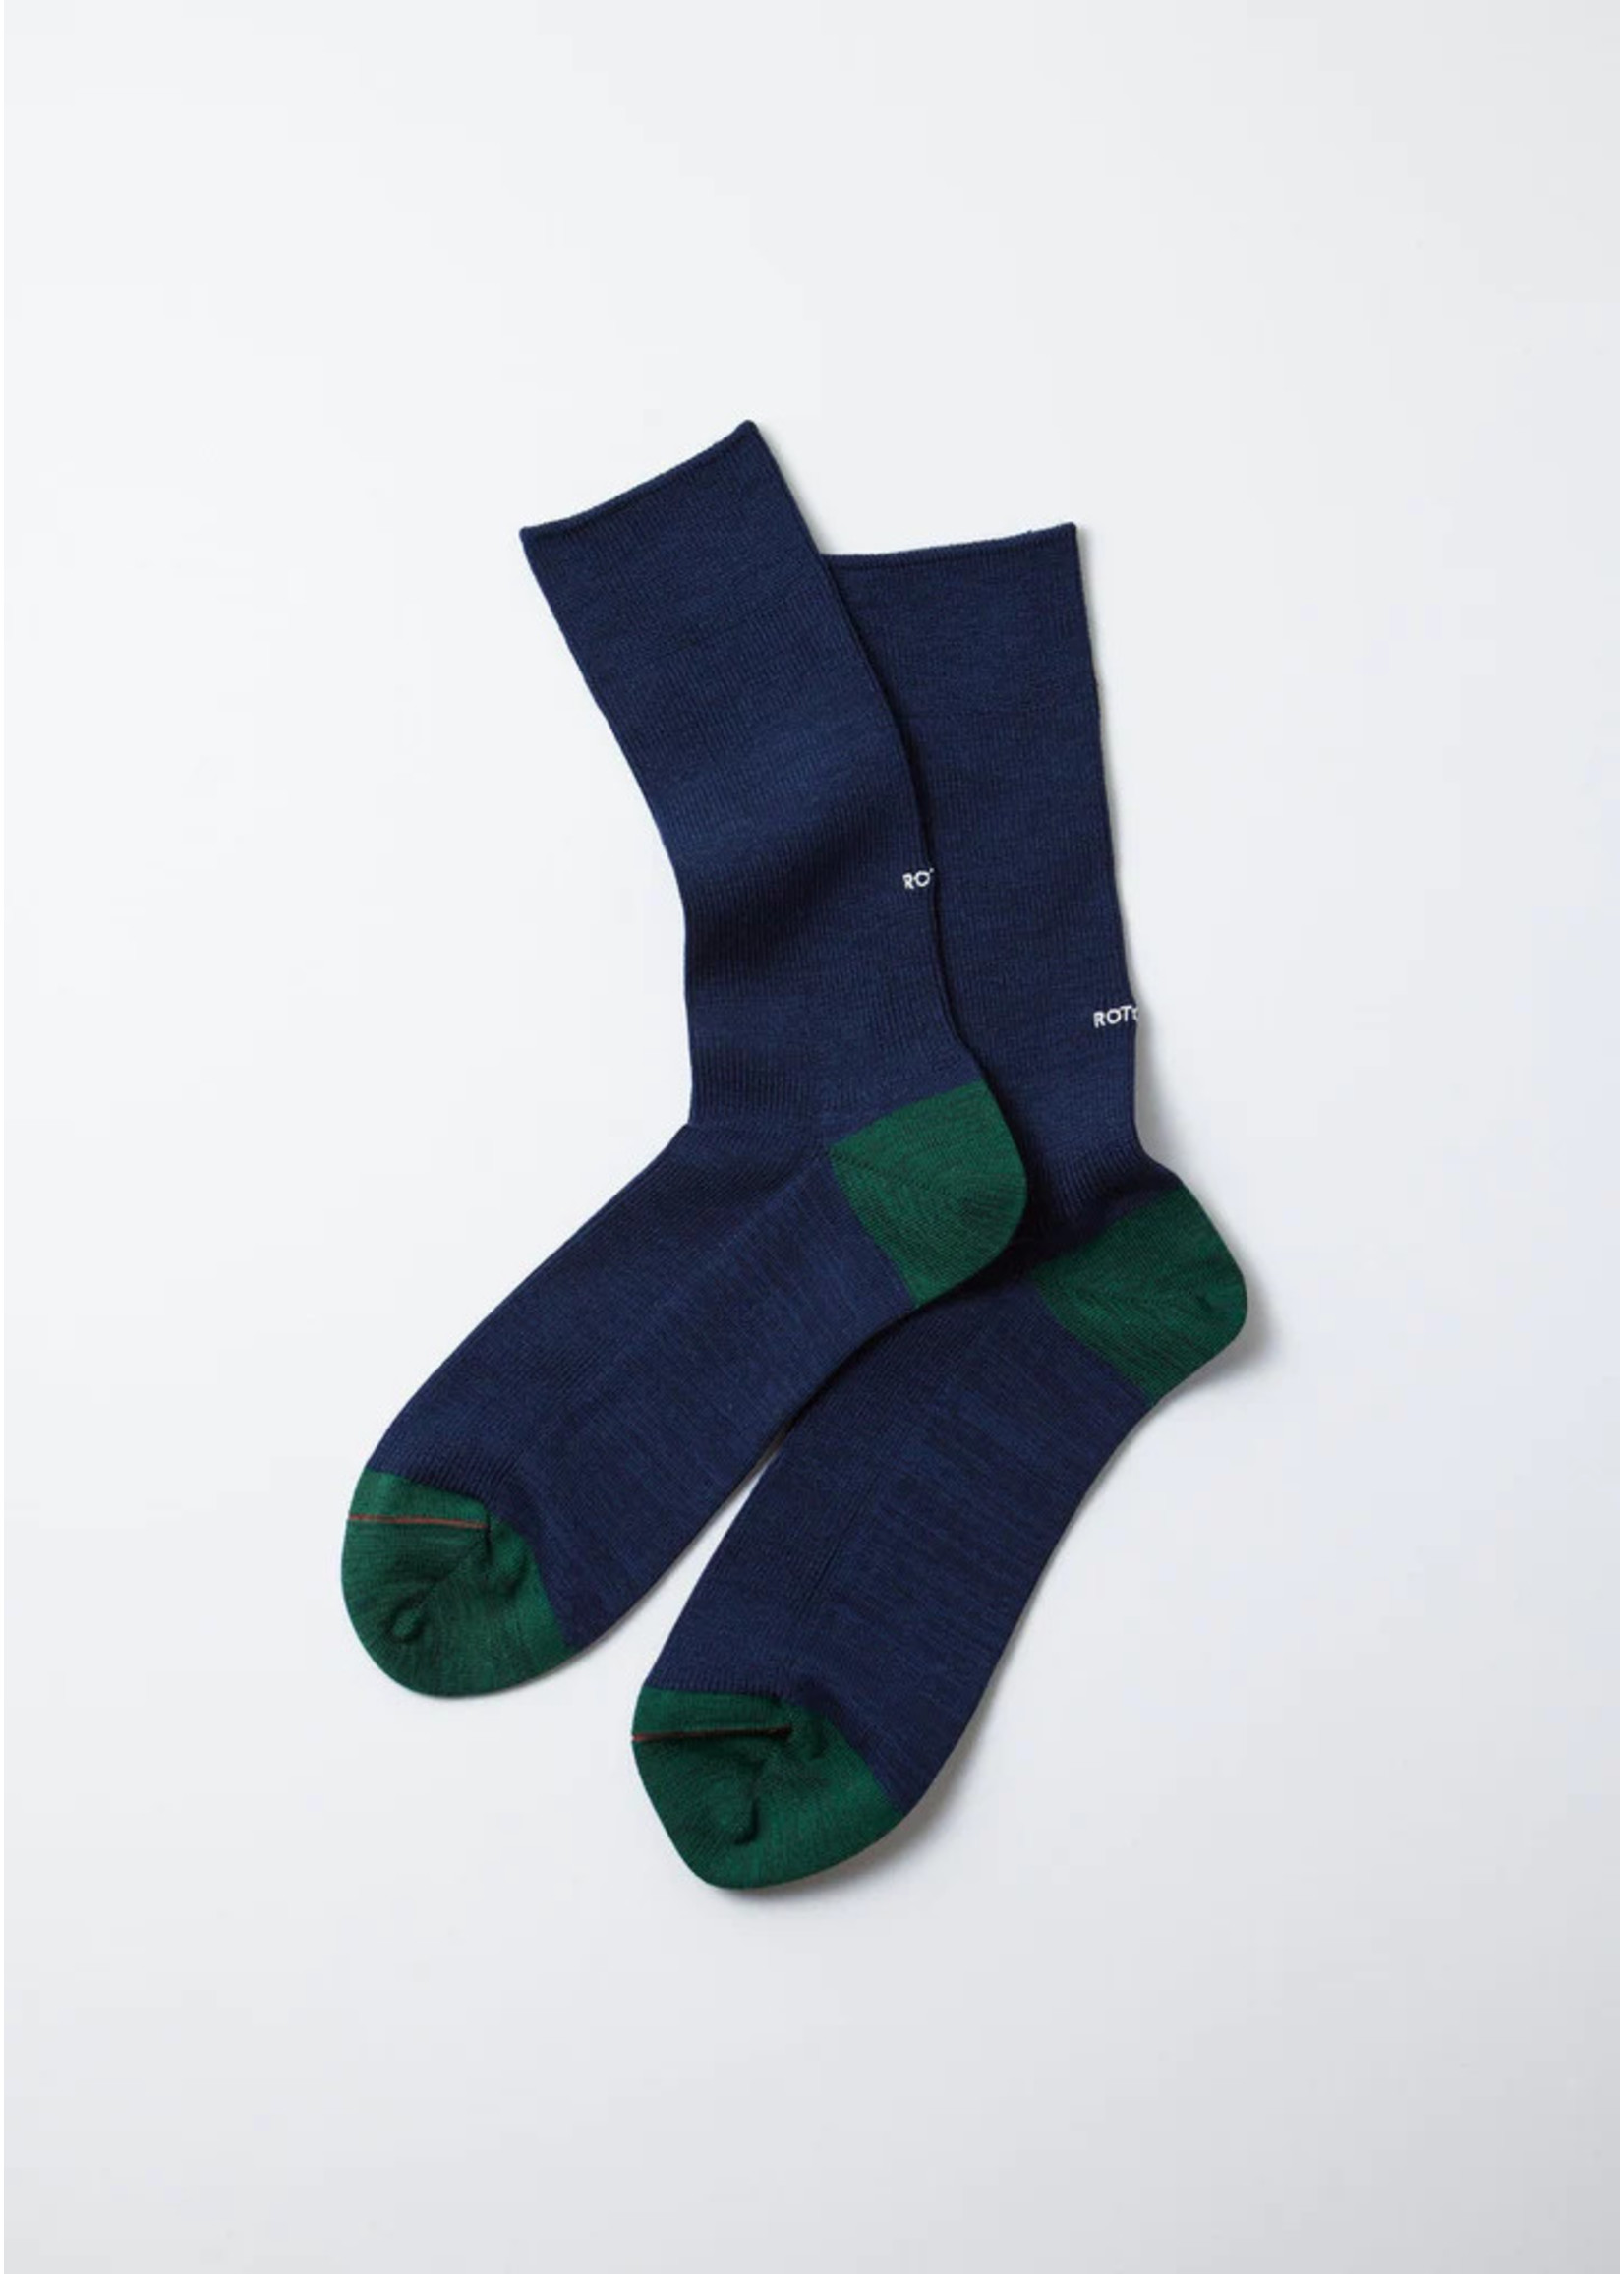 Organic Cotton and Recycled Poyester Ribbed Crew Socks by ROTOTO